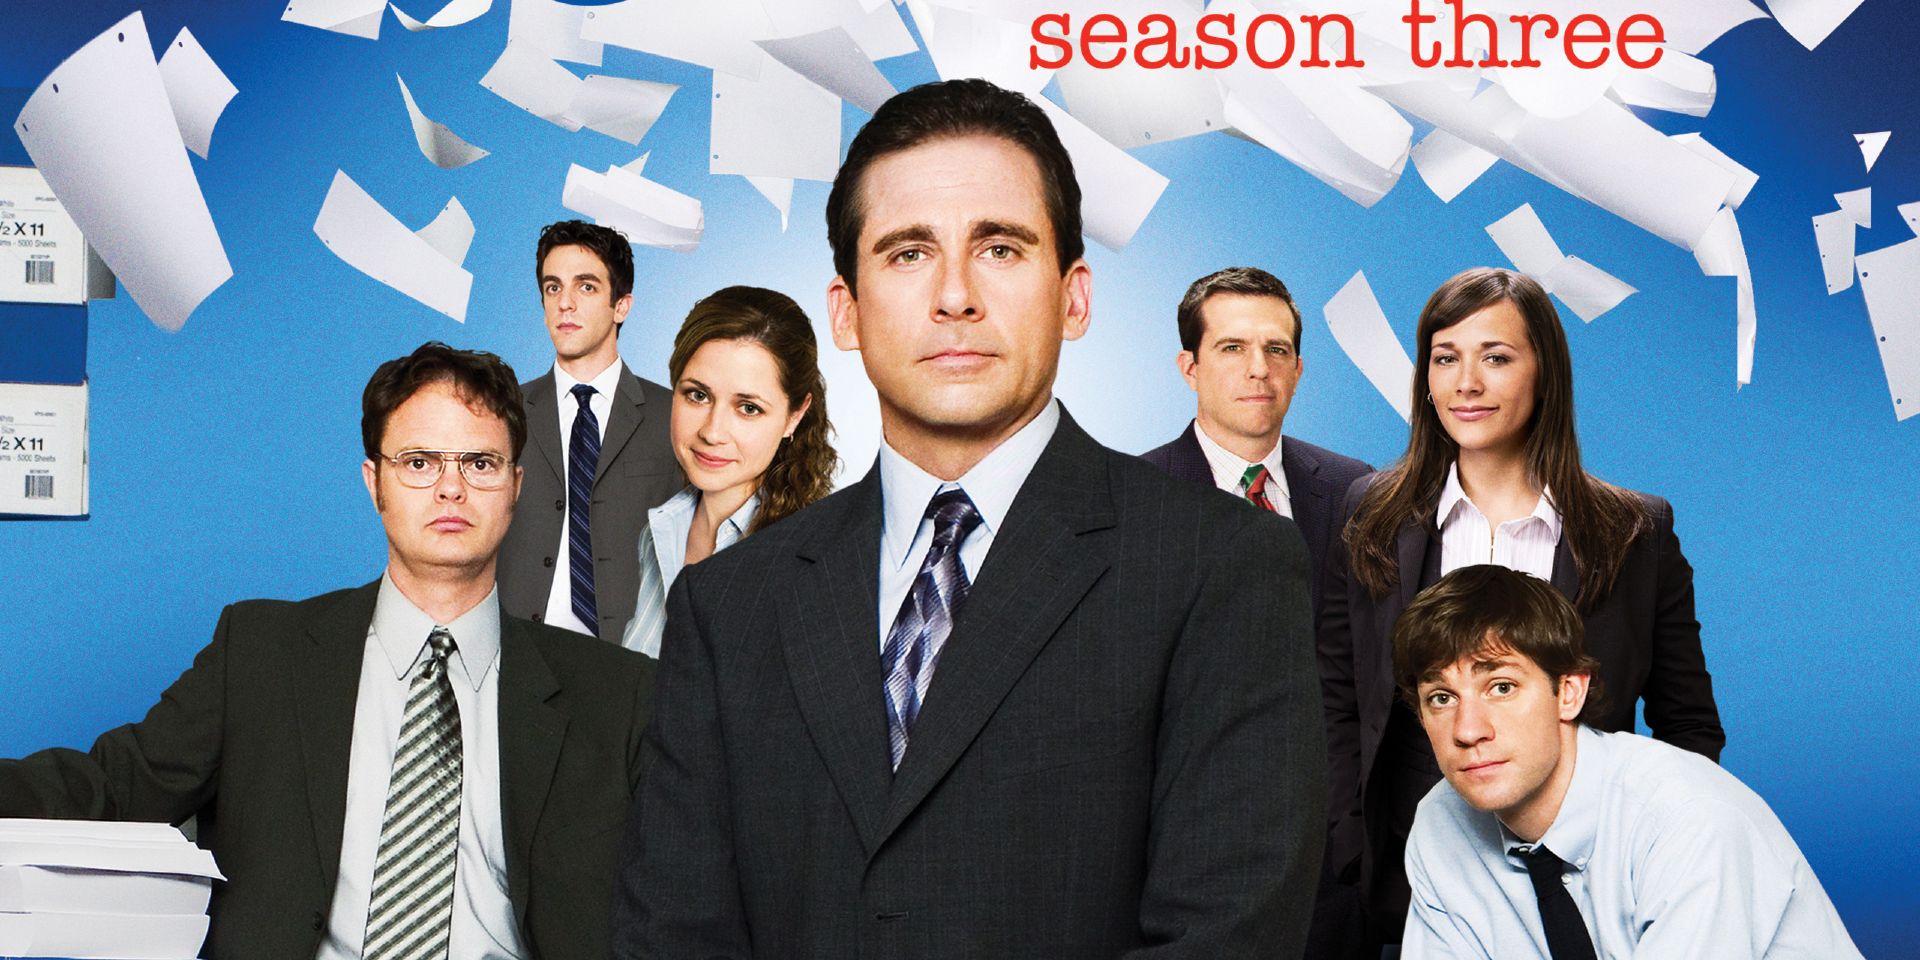 The Office All 9 Seasons Ranked by Critics